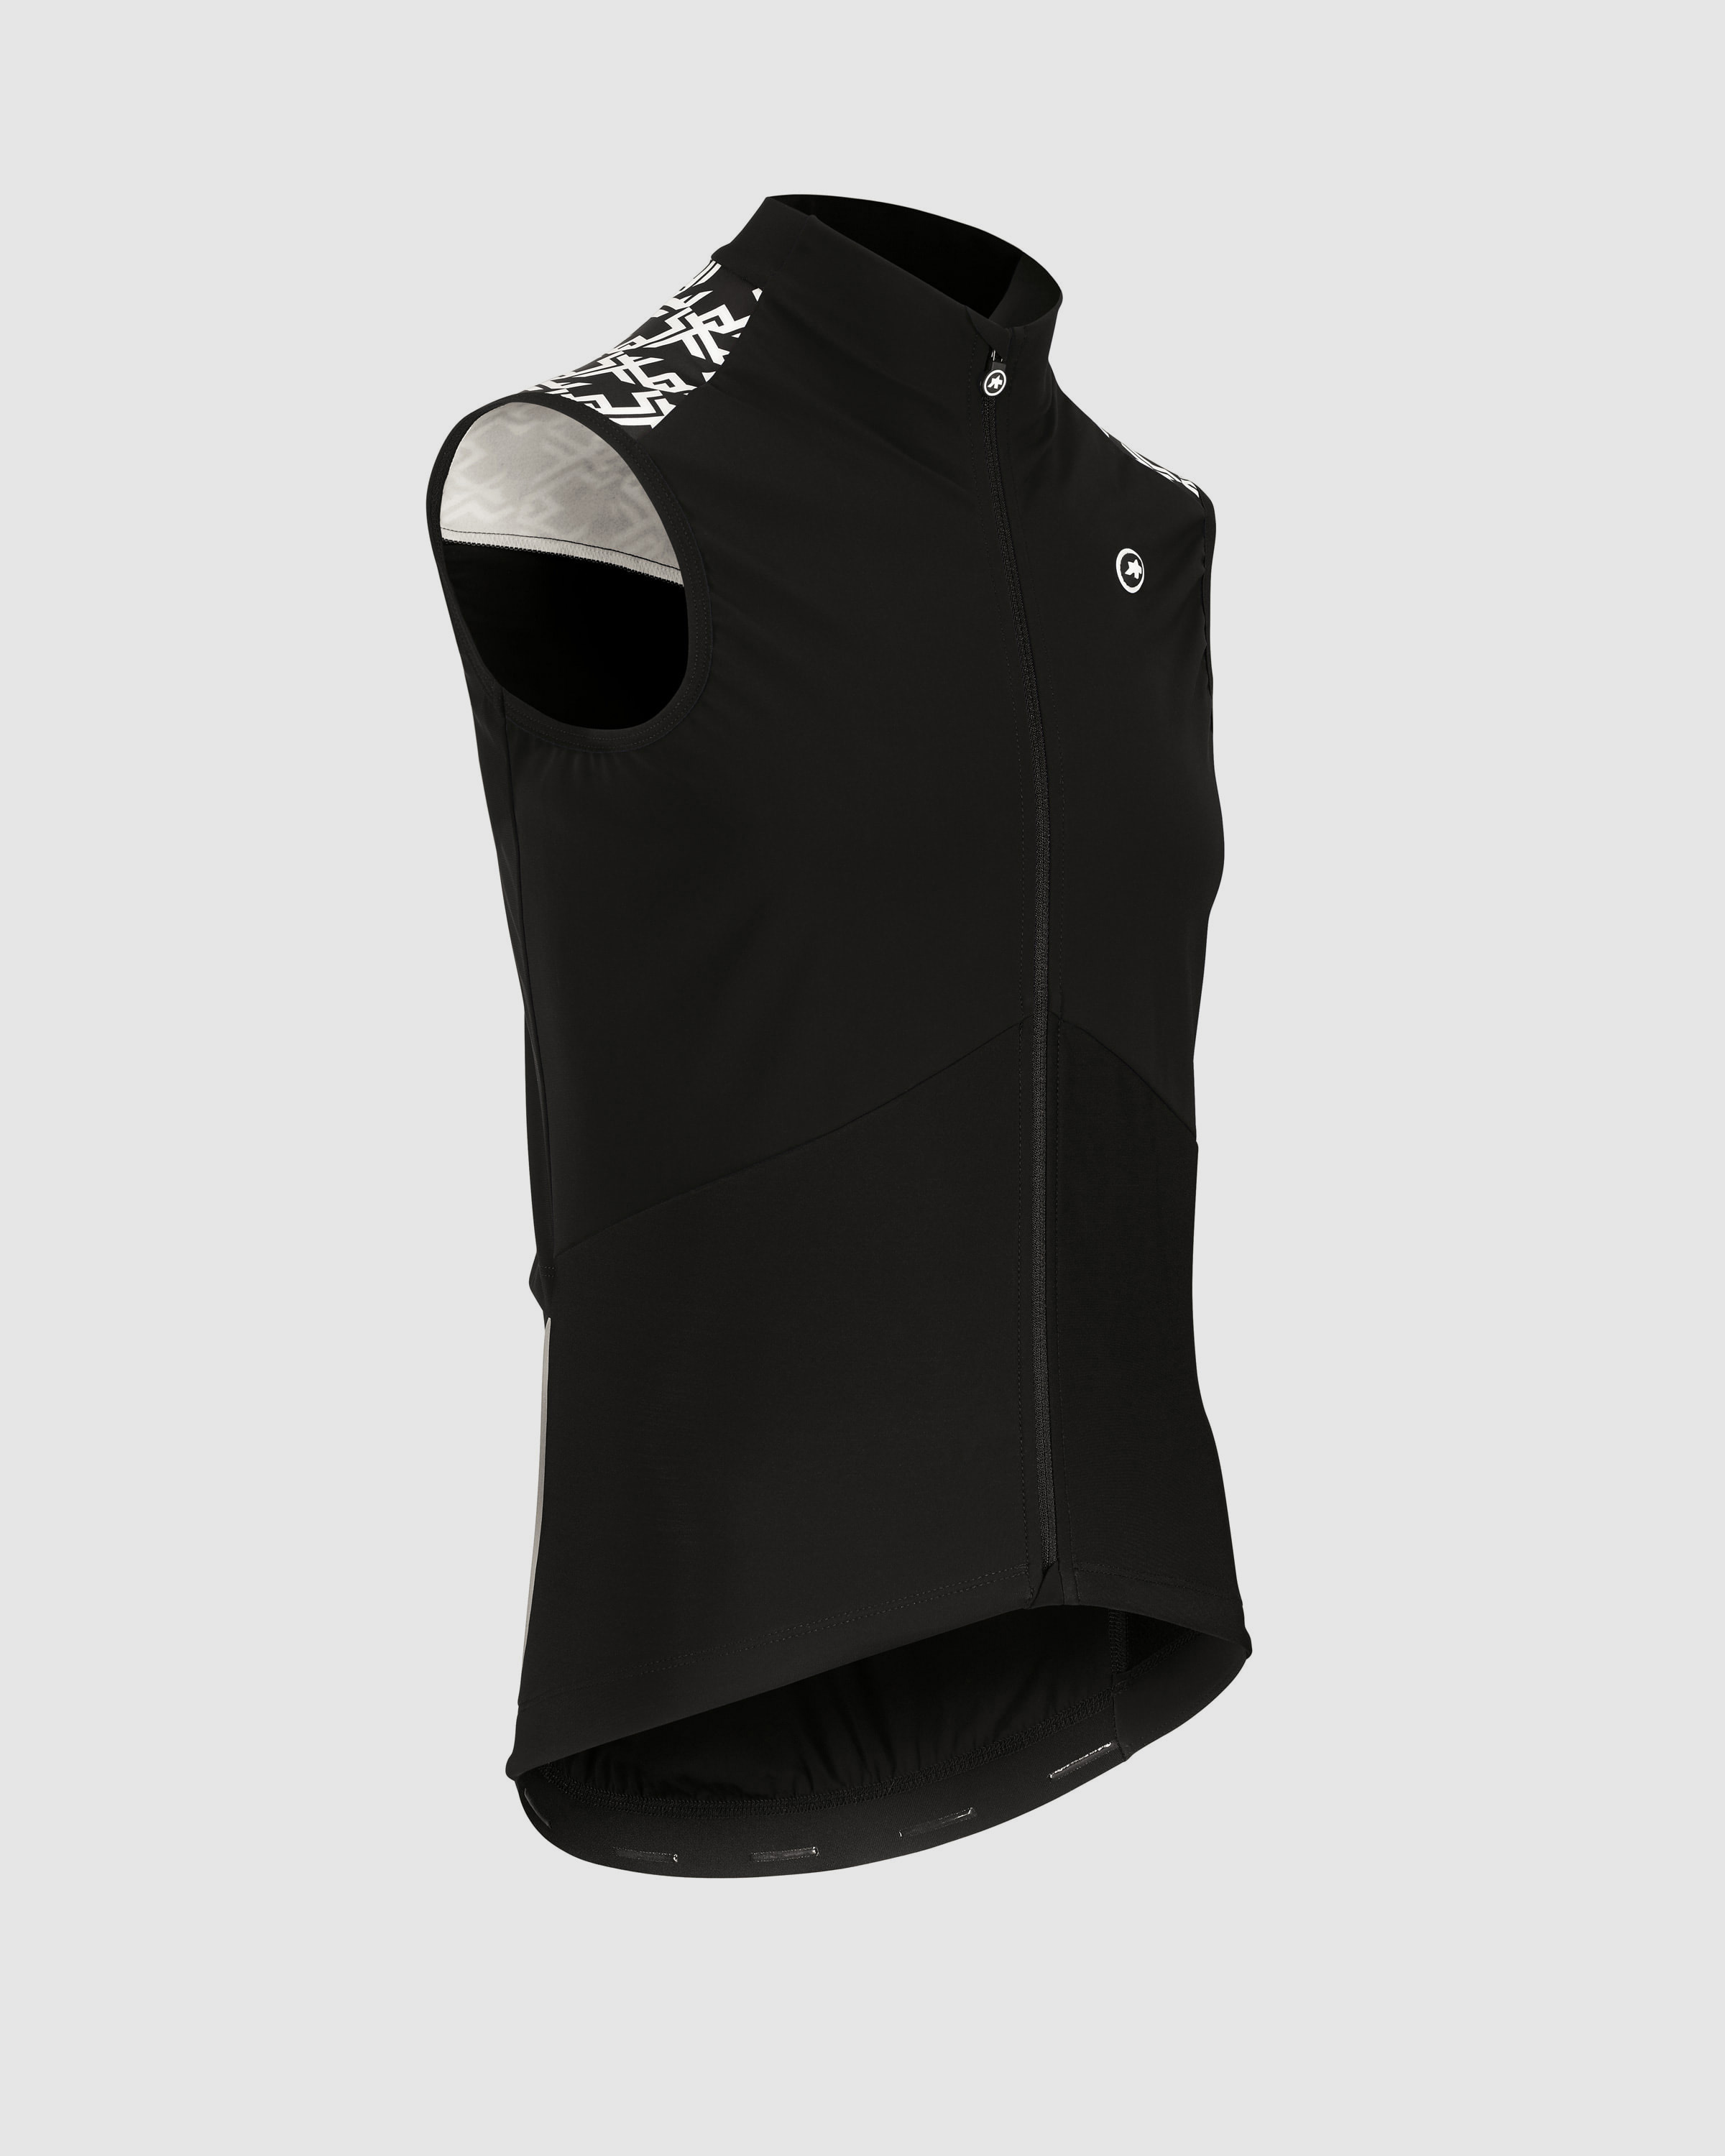 MILLE GT Airblock Vest - ASSOS Of Switzerland - Official Outlet